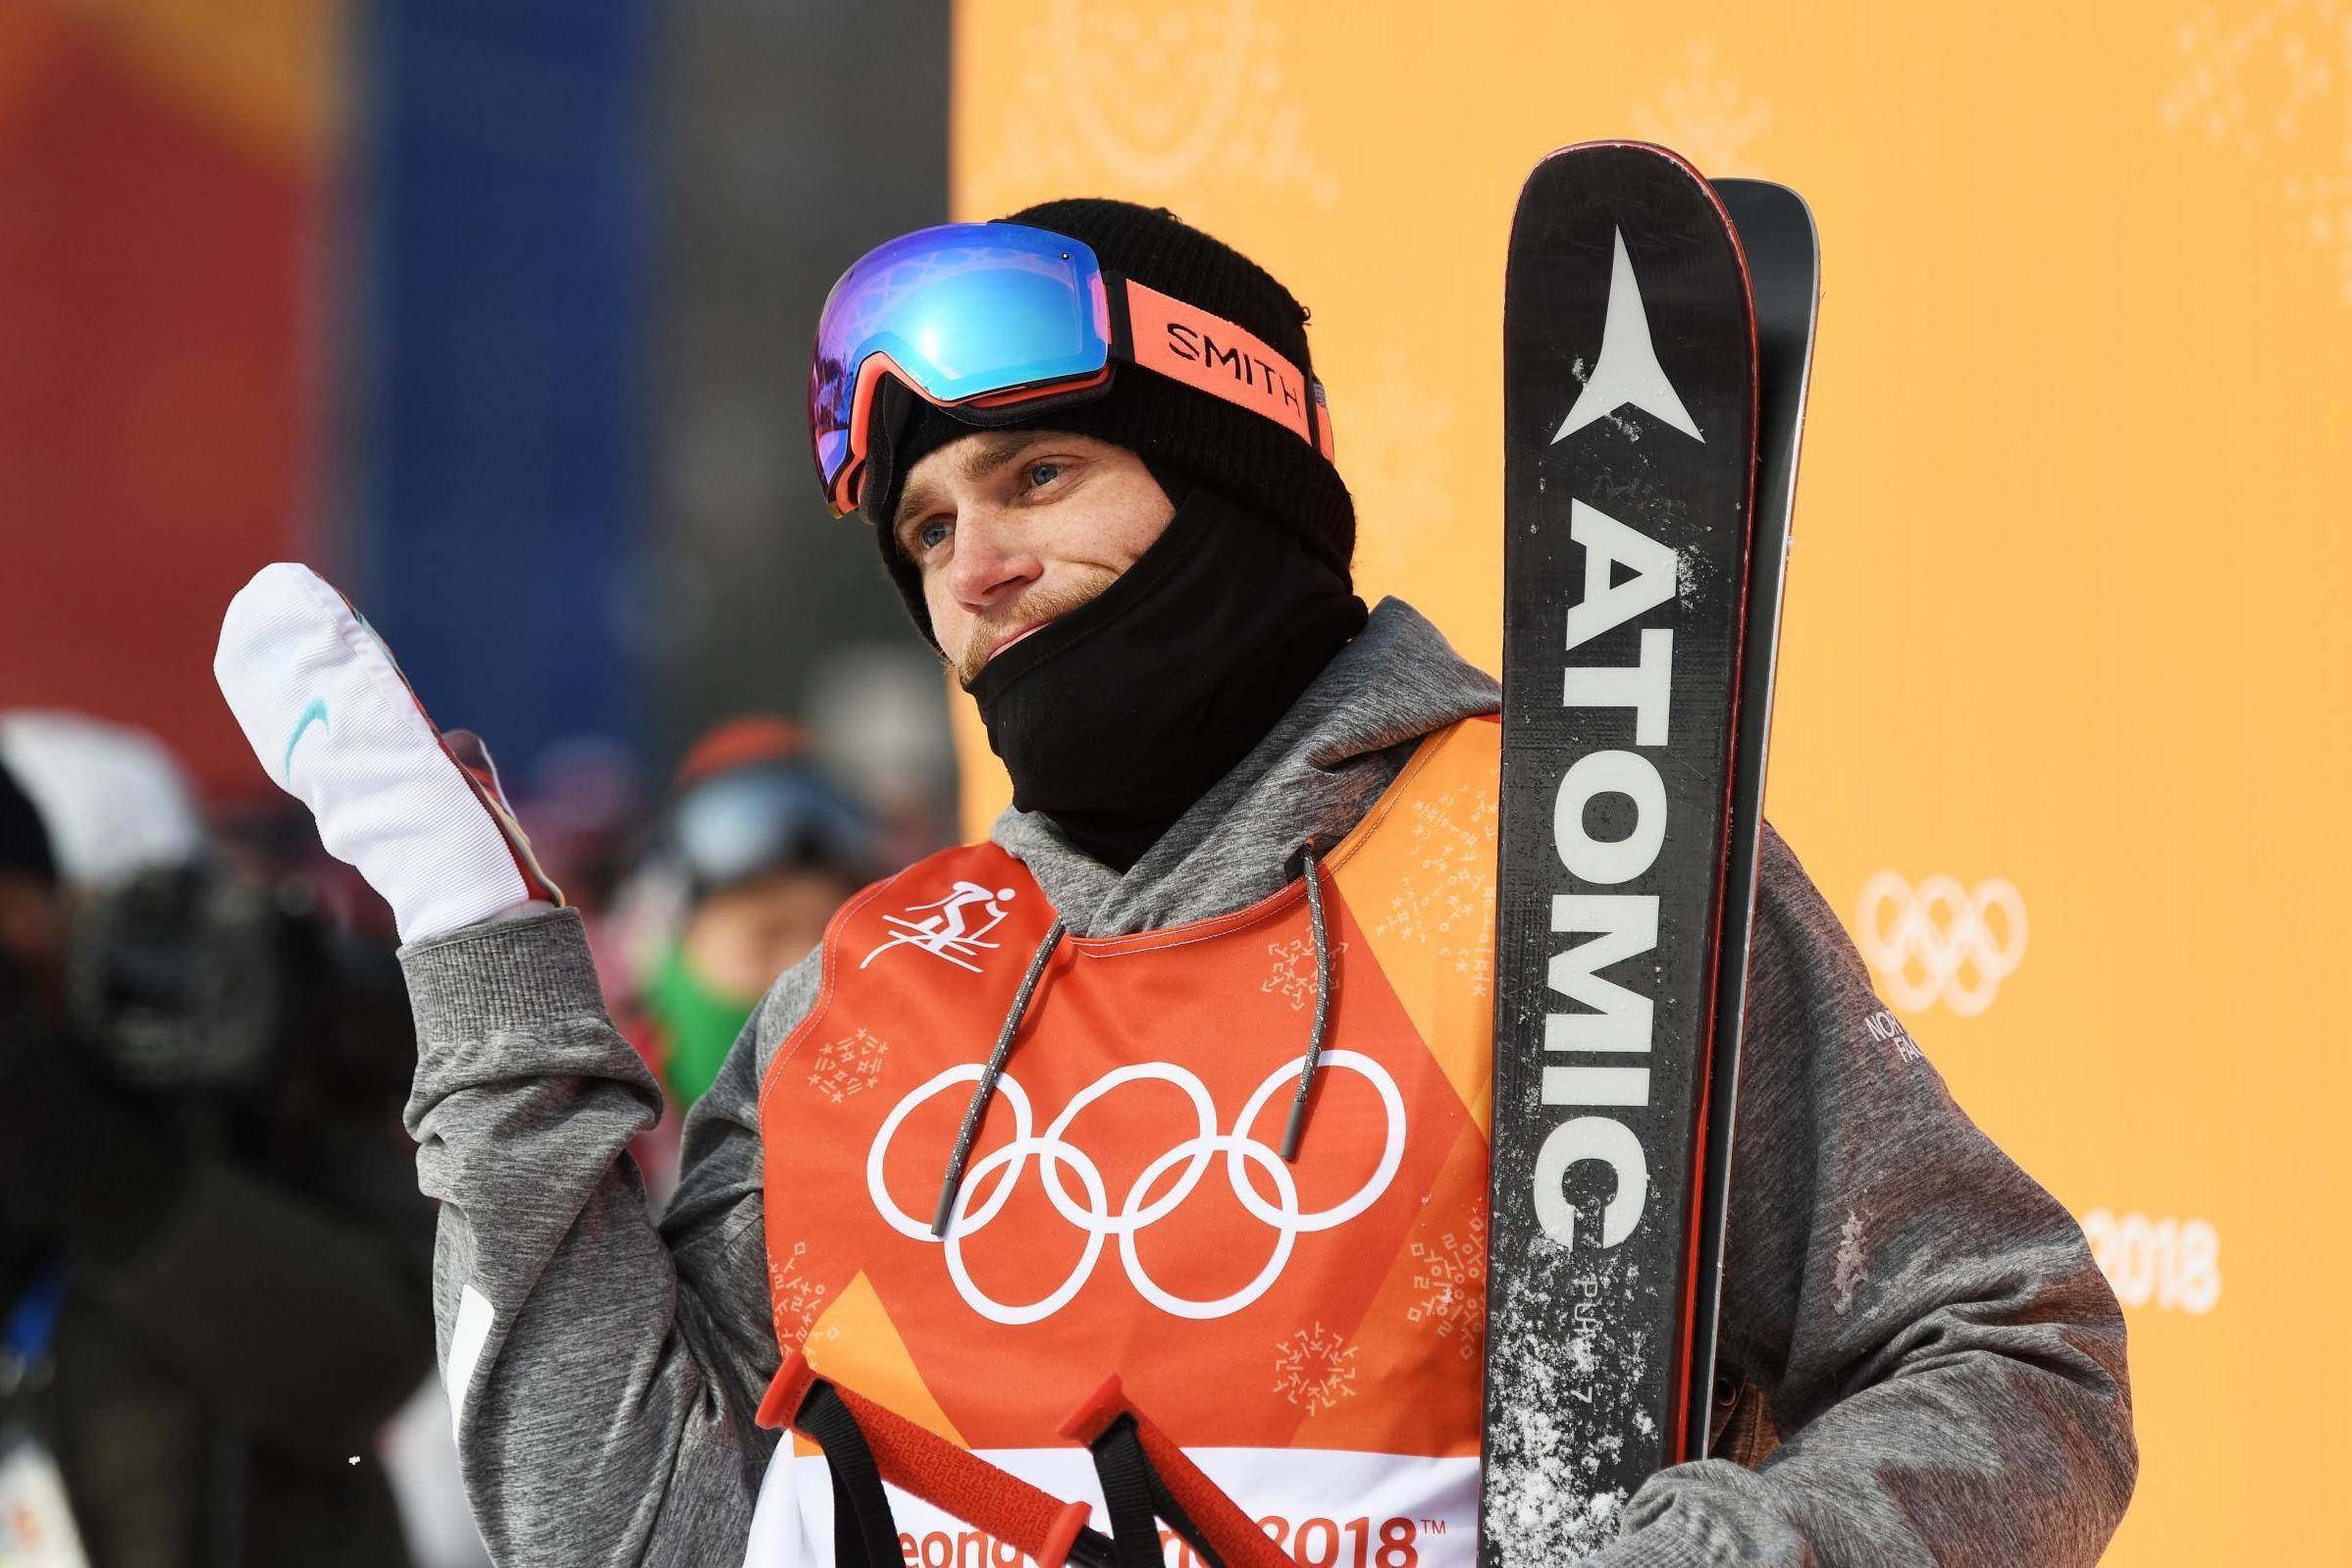 Olympian Gus Kenworthy shared a kiss with his boyfriend on TV (Getty)